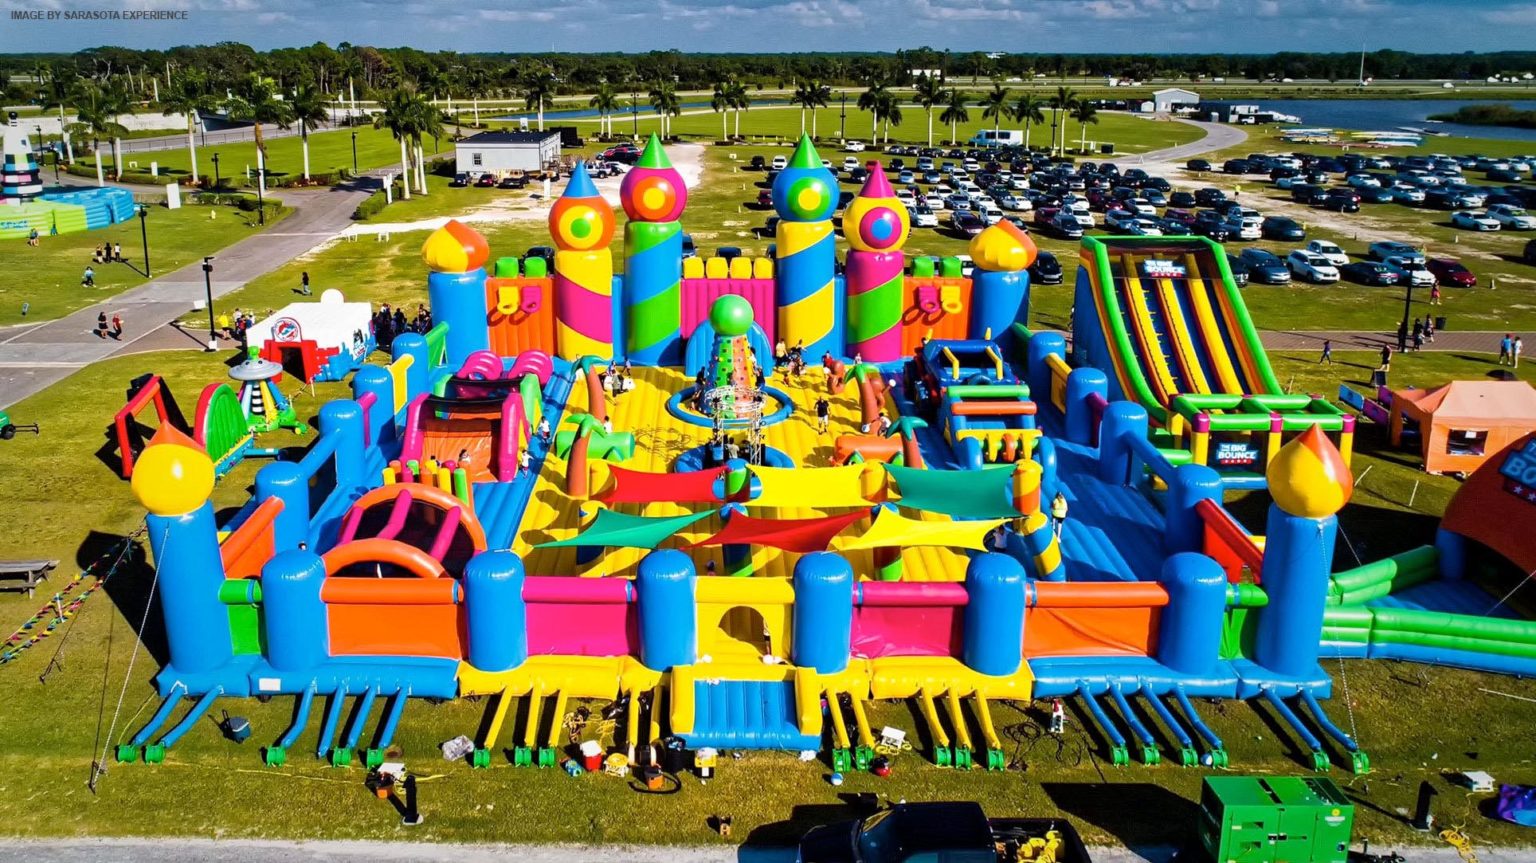 World s Largest Bounce House Set to Inflate in Boca Raton Beginning